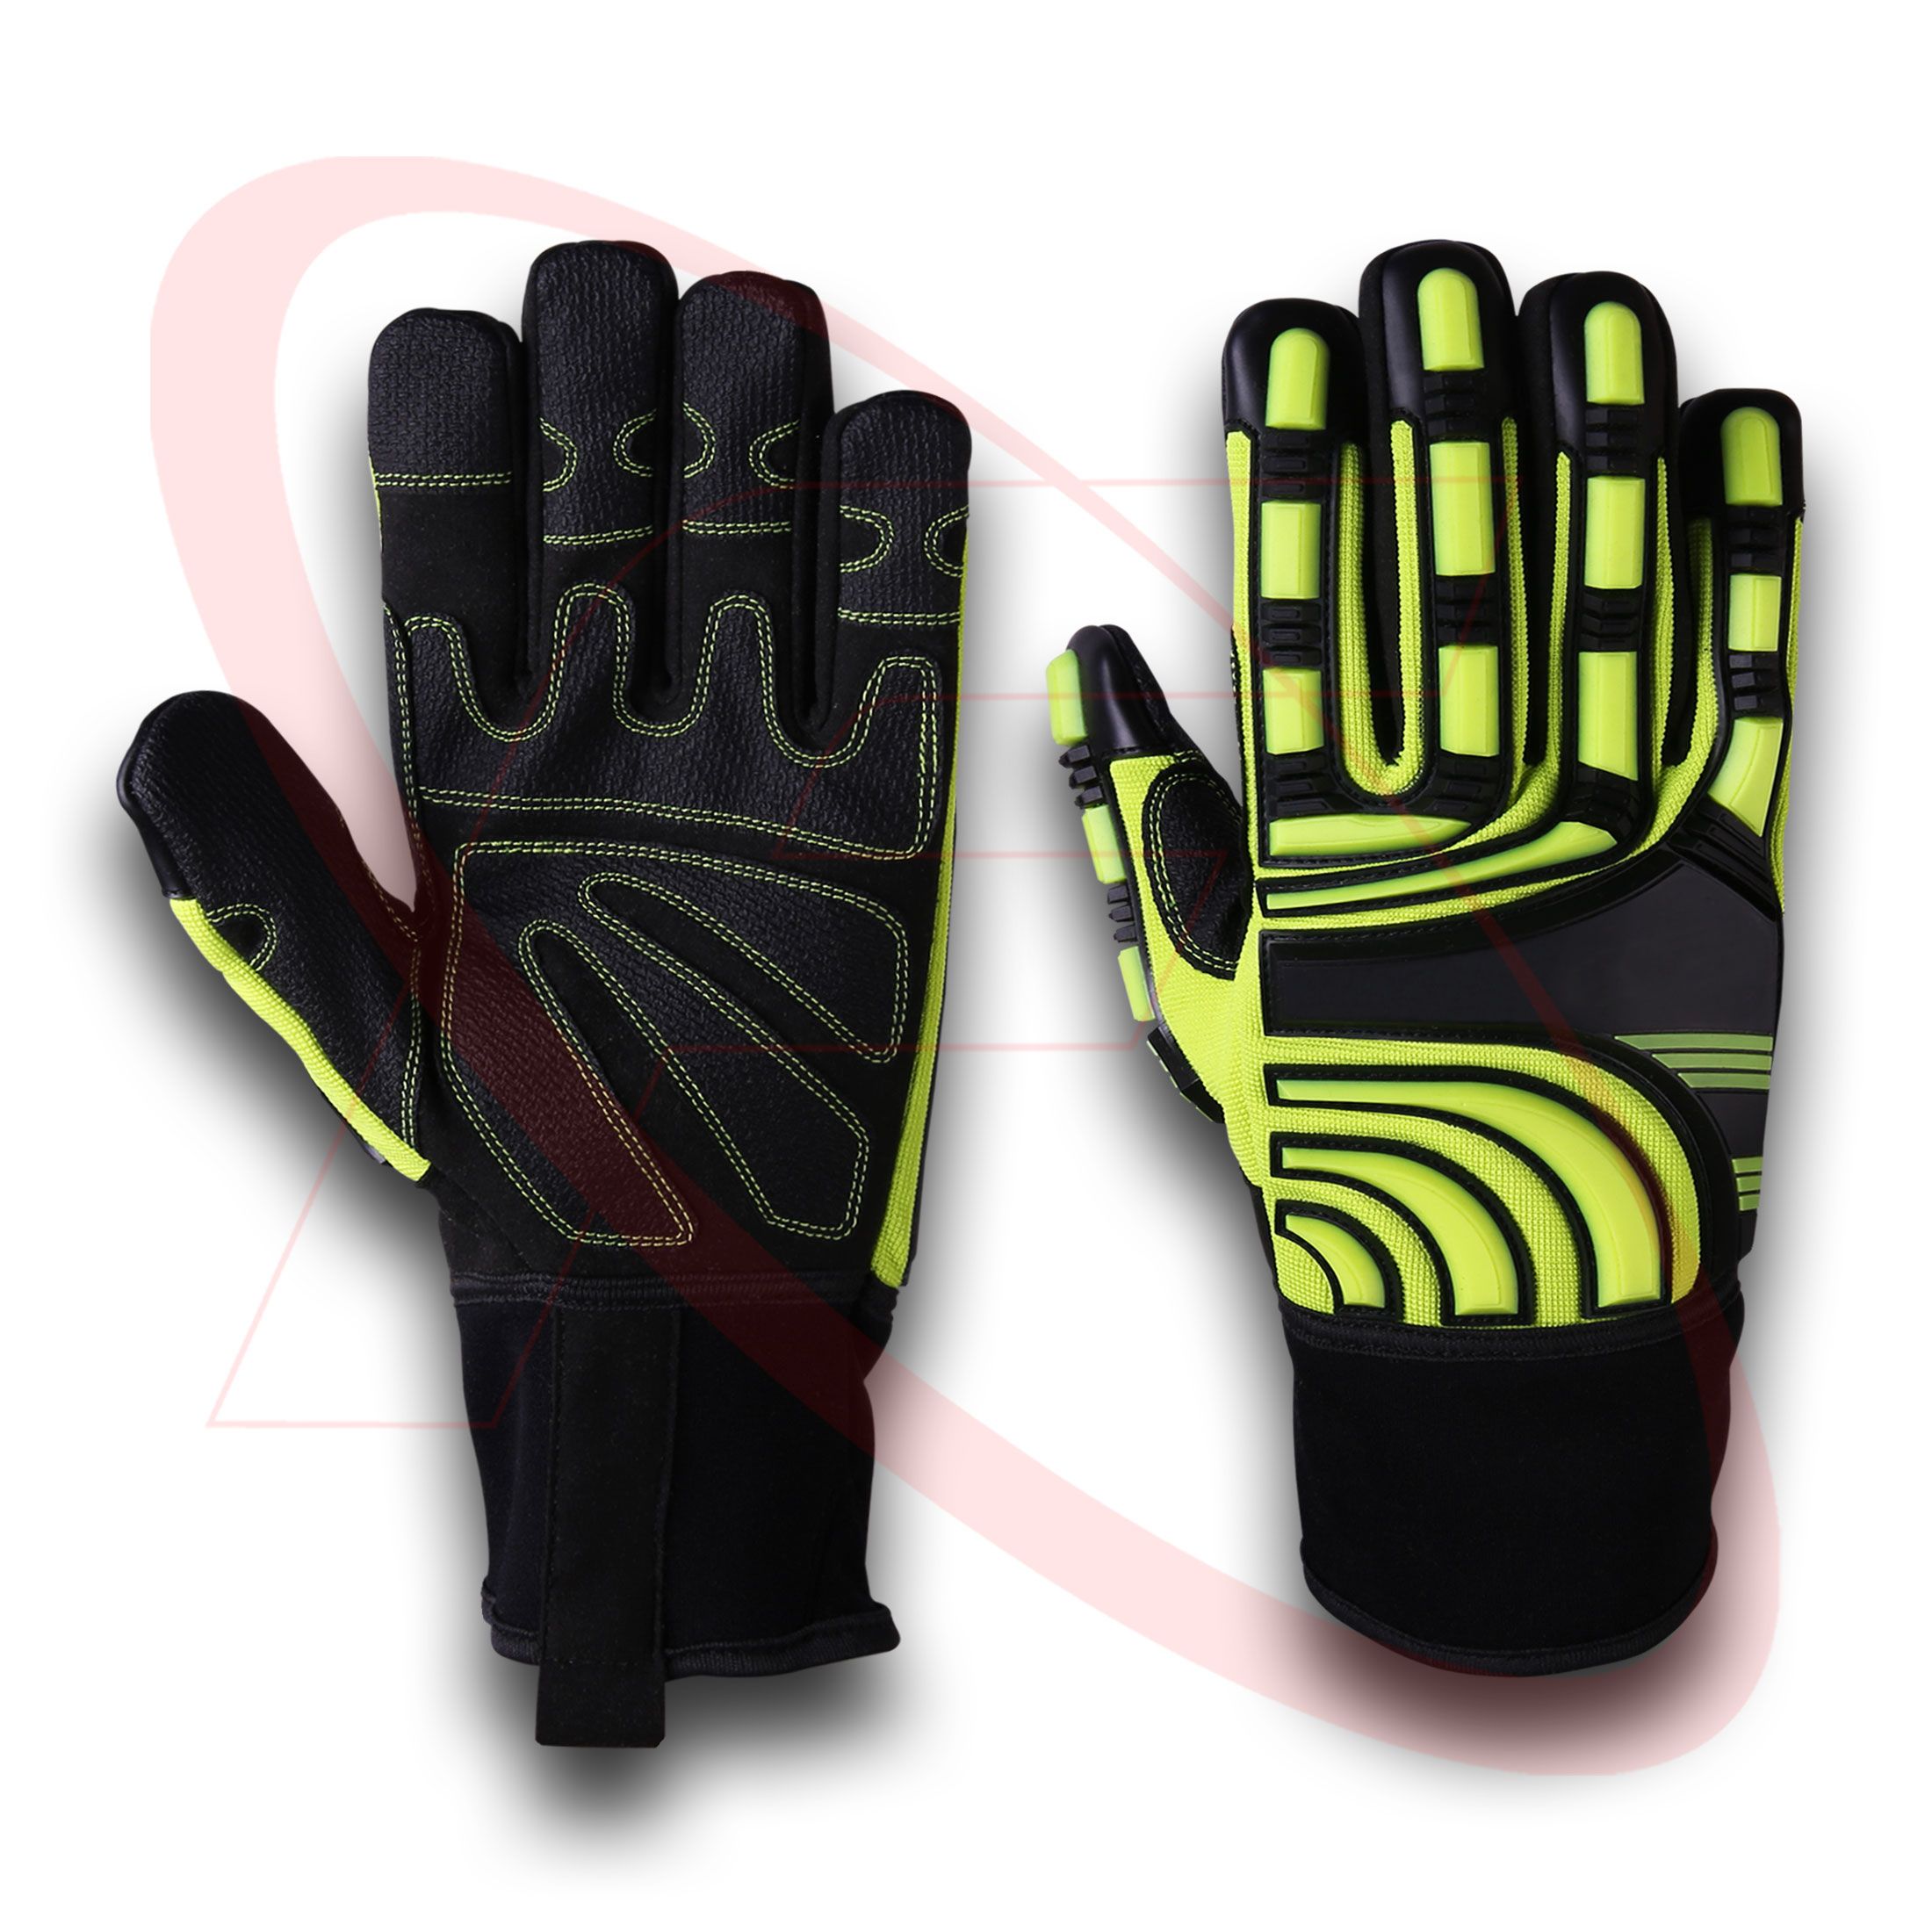 Impact Protective Mechanic Gloves Hand Safety Gloves